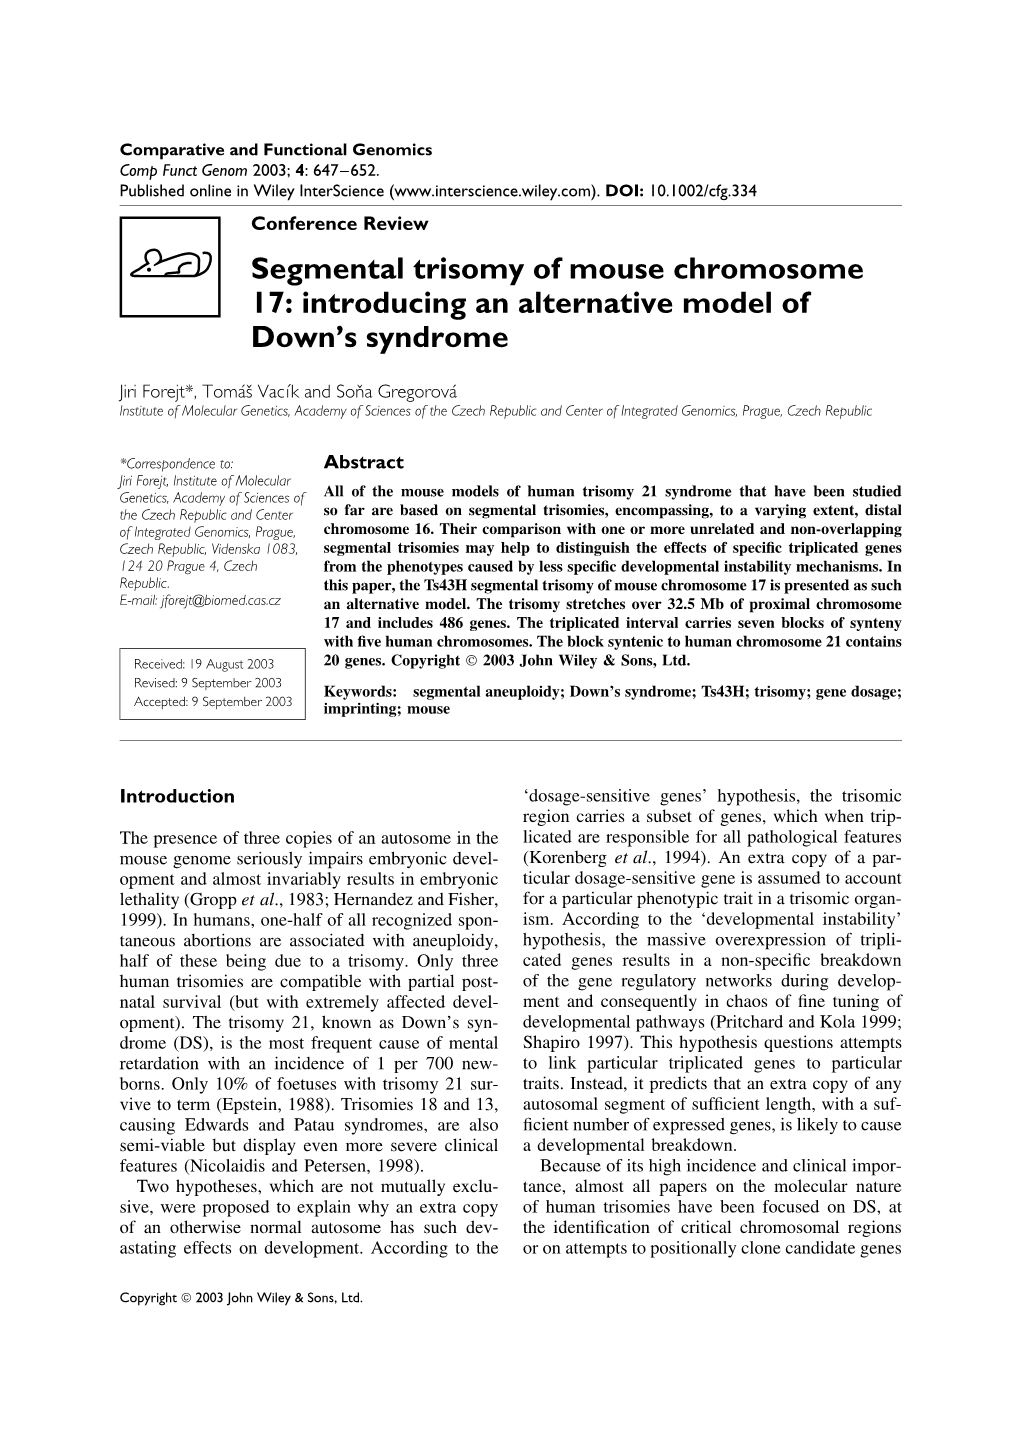 Segmental Trisomy of Mouse Chromosome 17: Introducing an Alternative Model of Down’S Syndrome